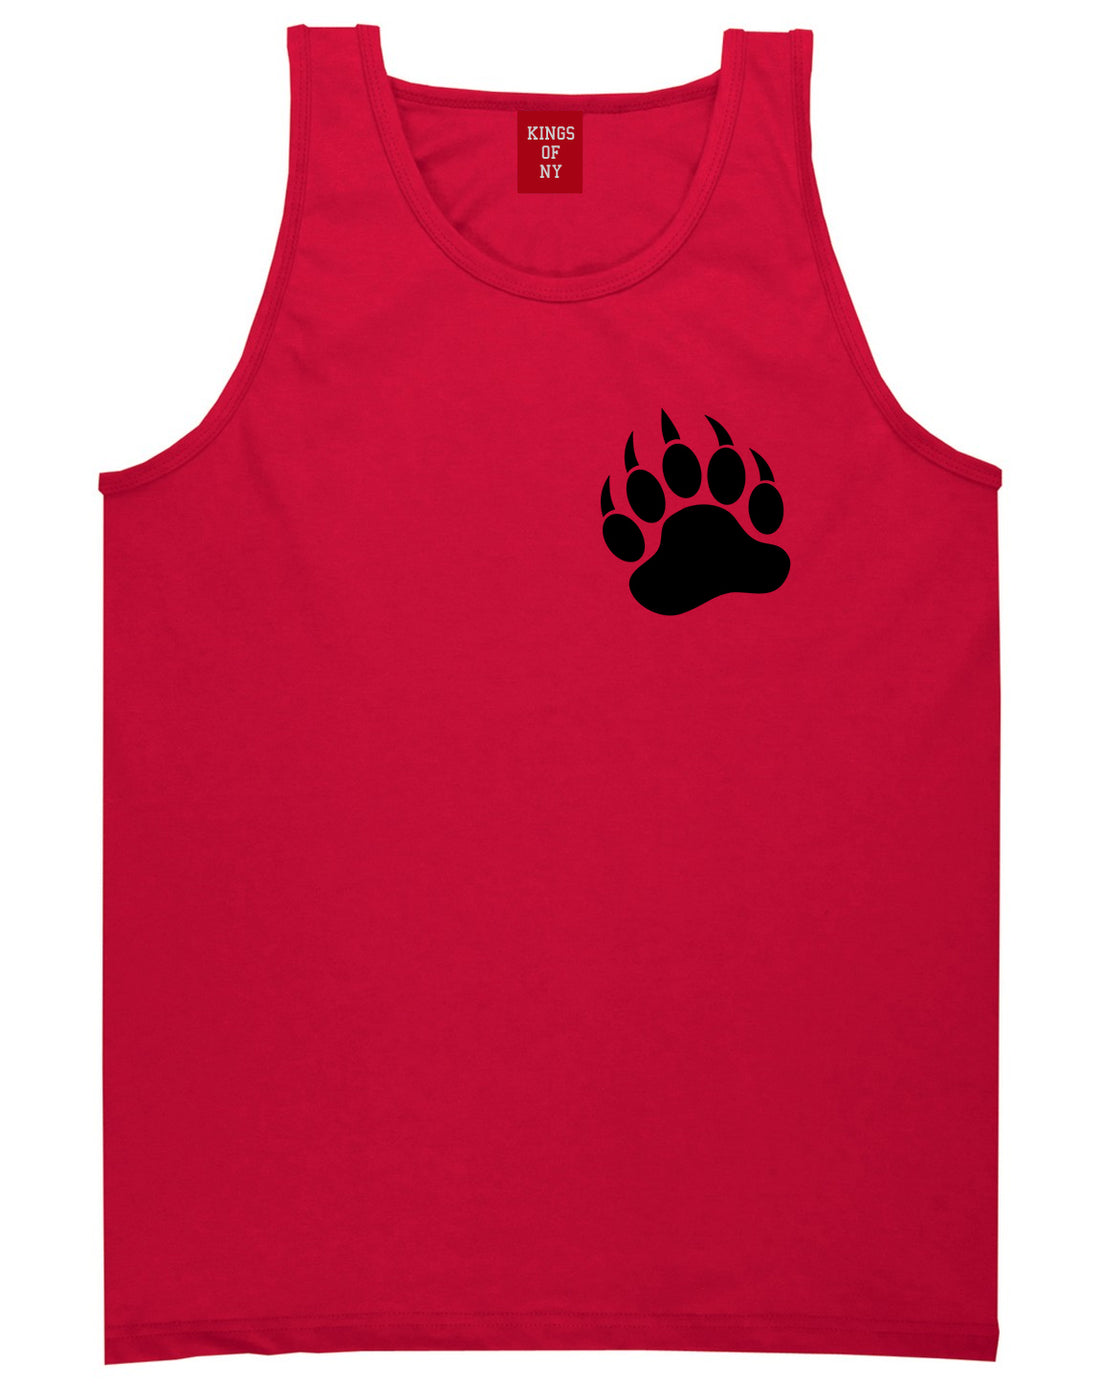 Bear Paws Chest Red Tank Top Shirt by Kings Of NY